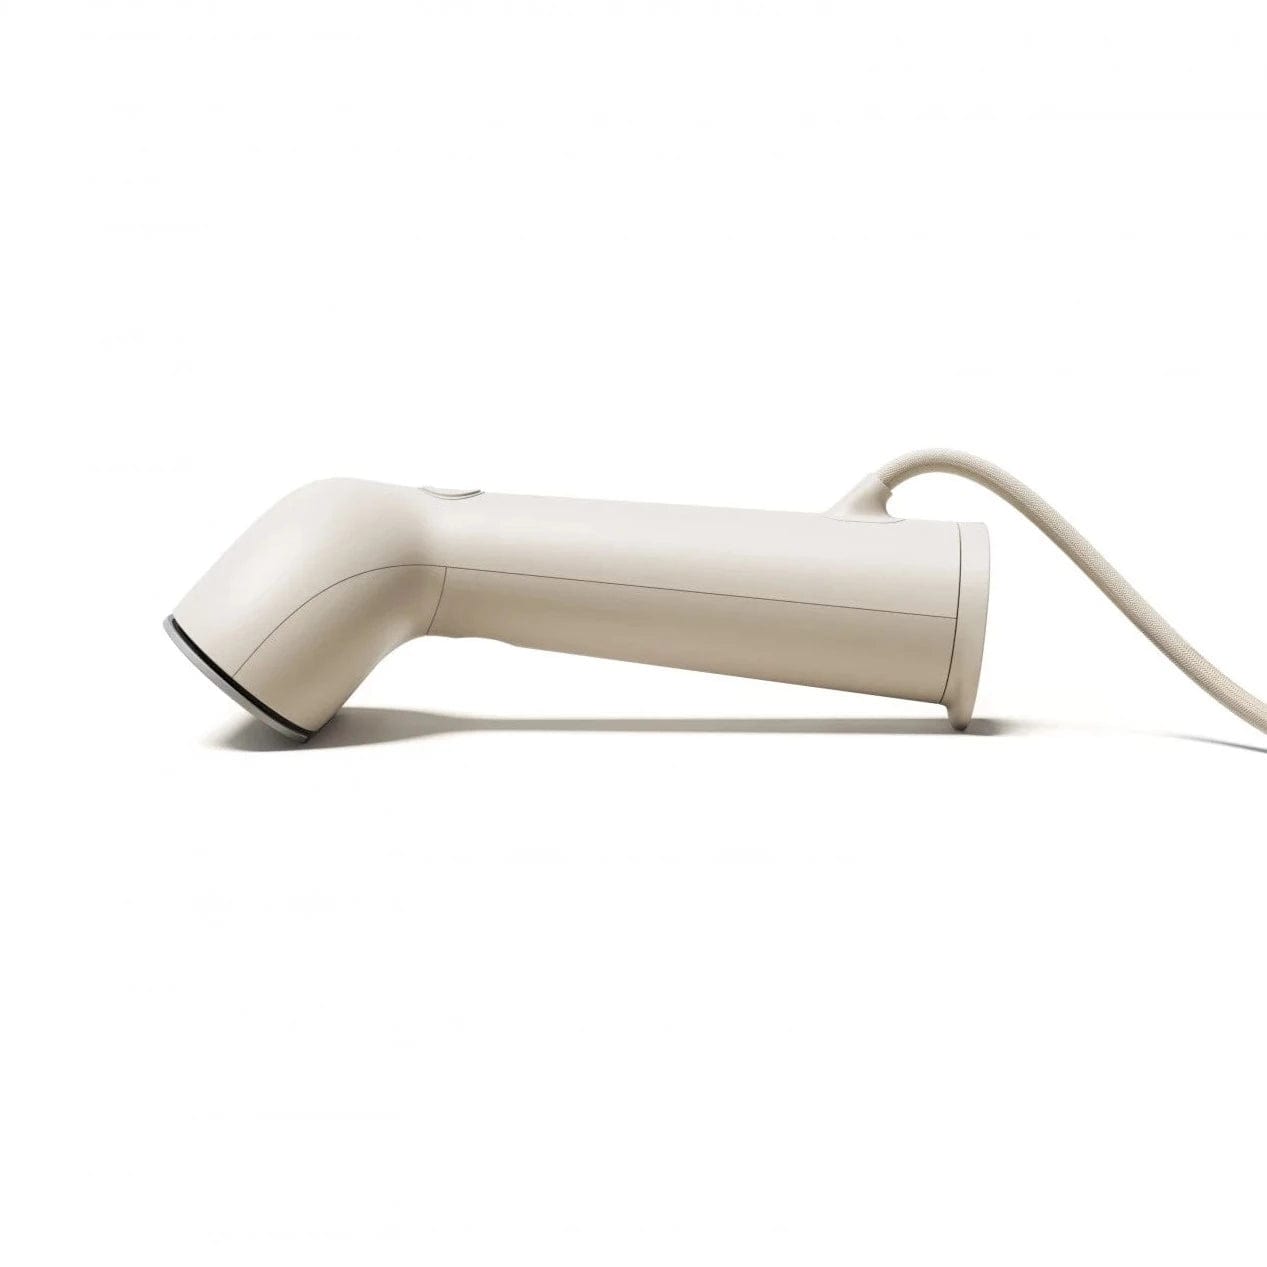 Handheld Clothes Steamer | Cirrus 3 by Steamery - Cashmere Circle